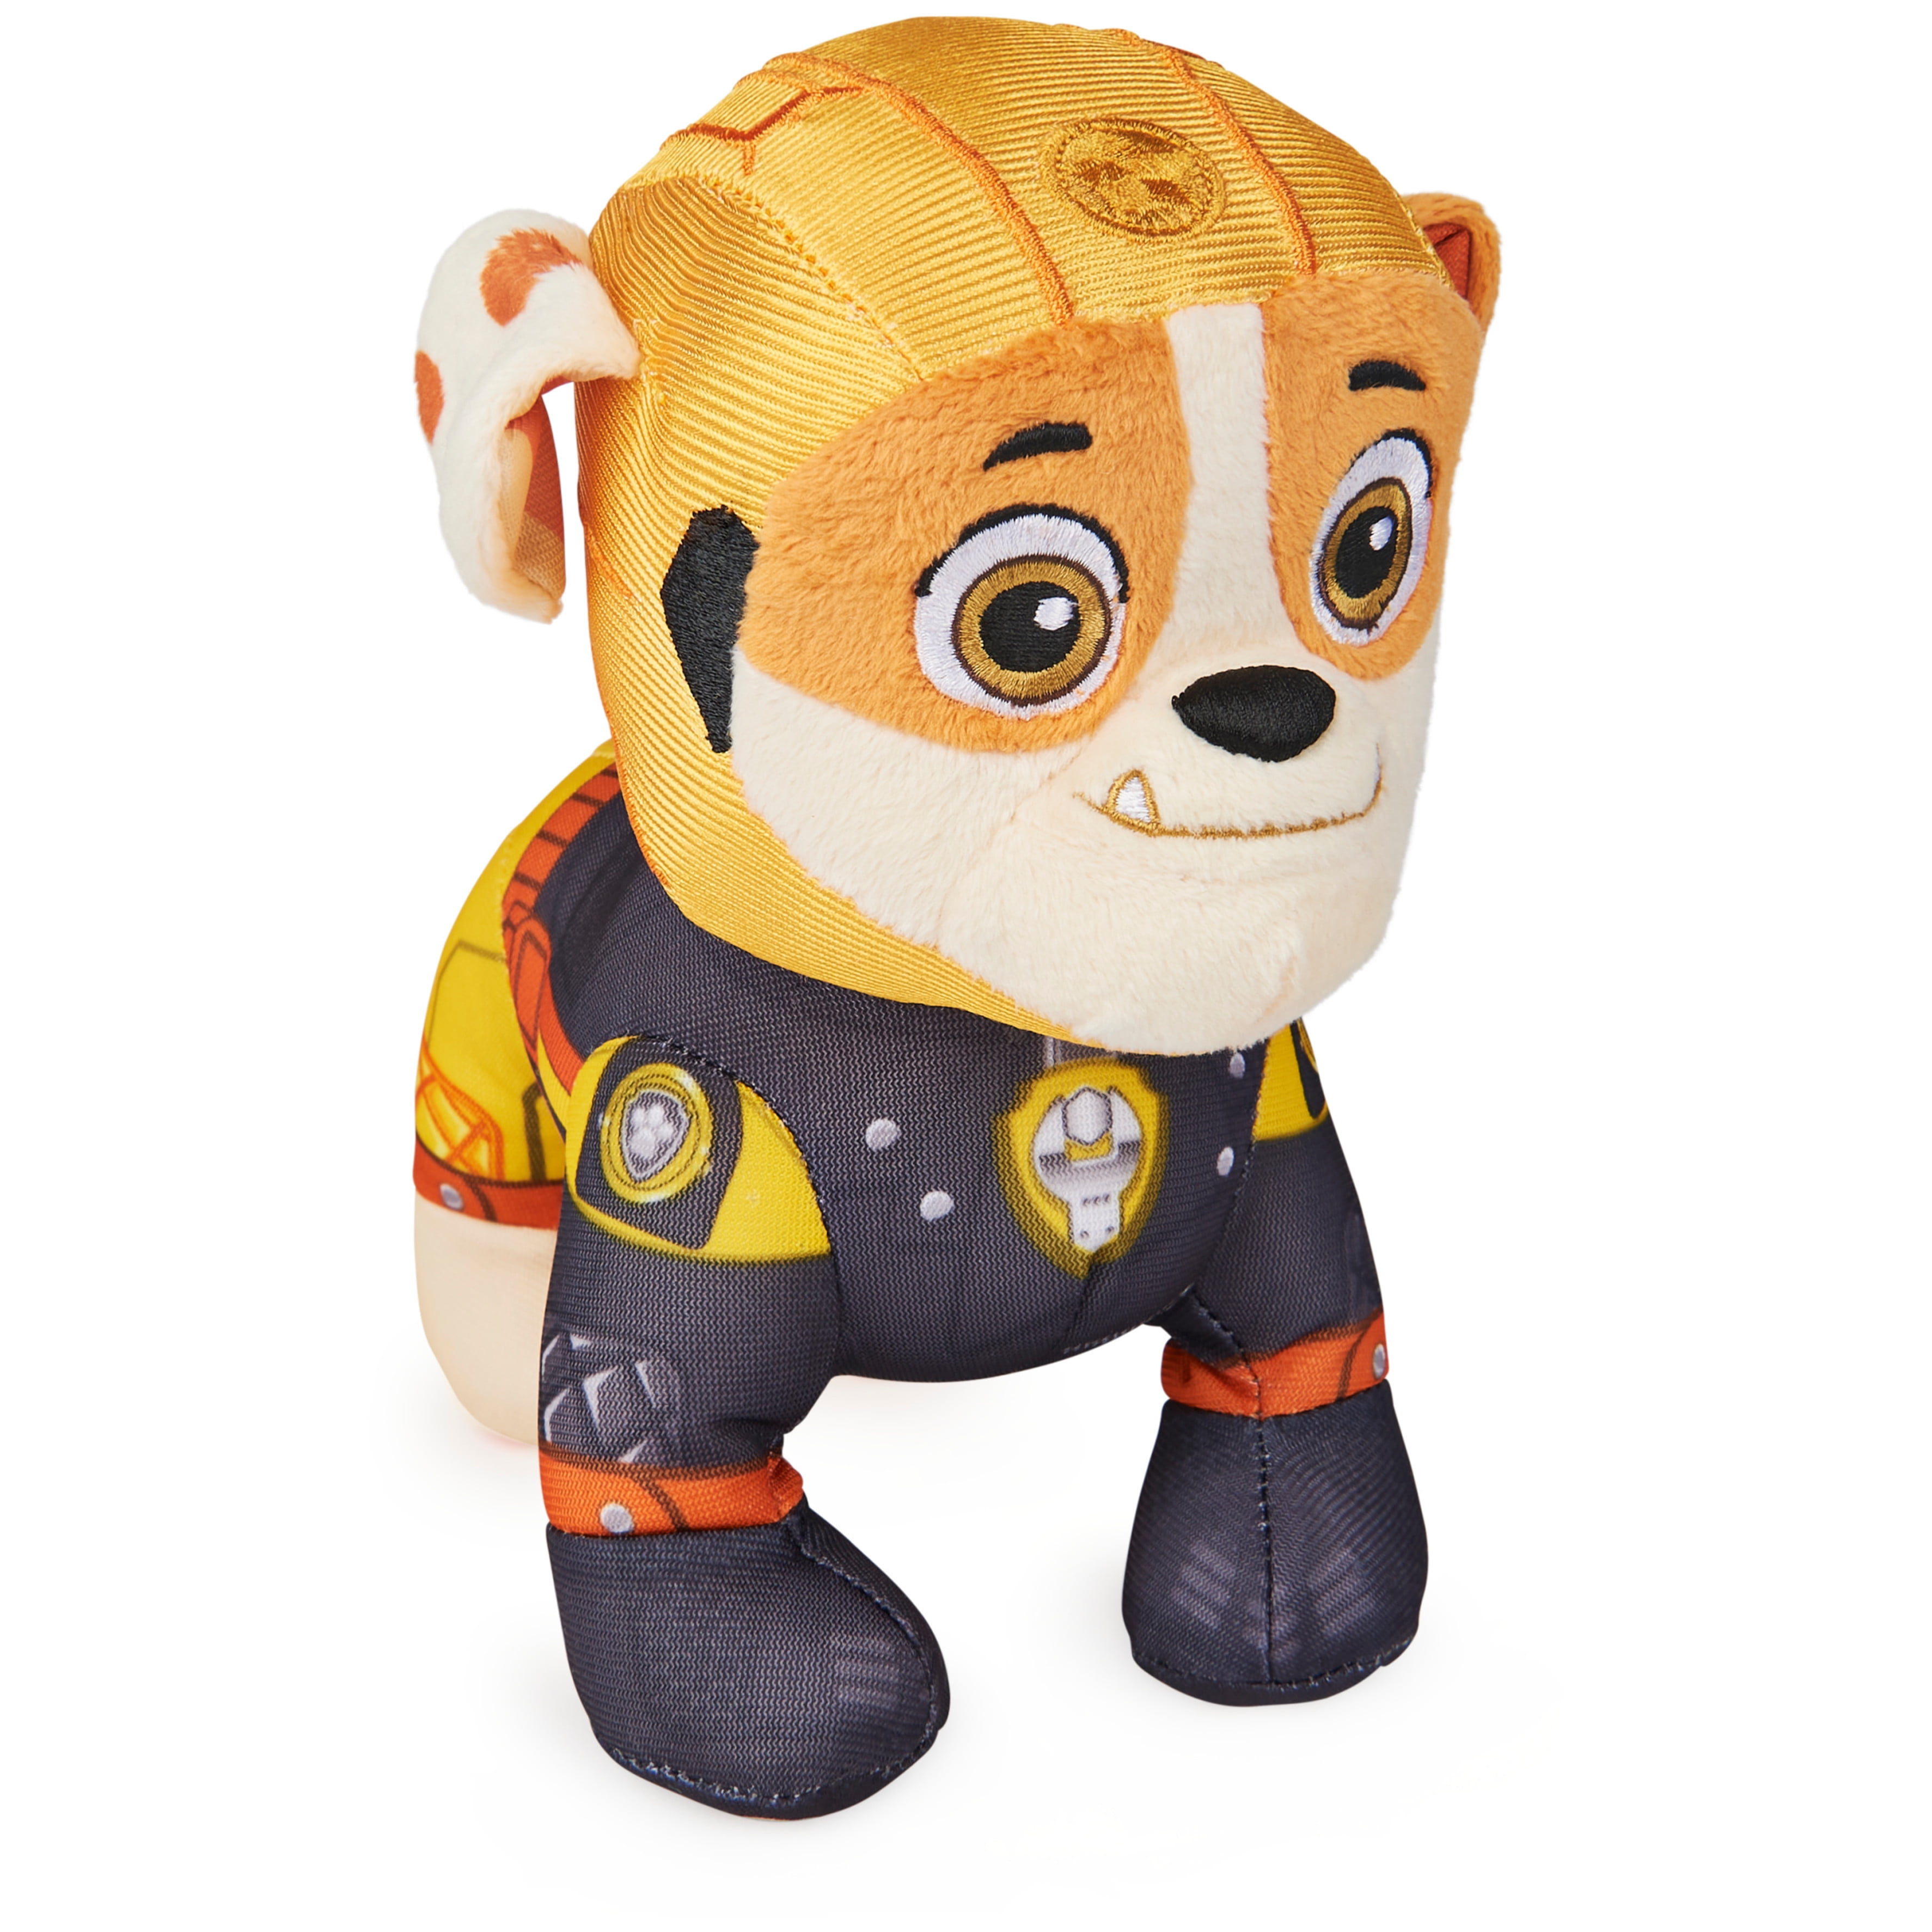 Nickelodeon Paw Patrol Ryder 9" inches Plush New with Tags 